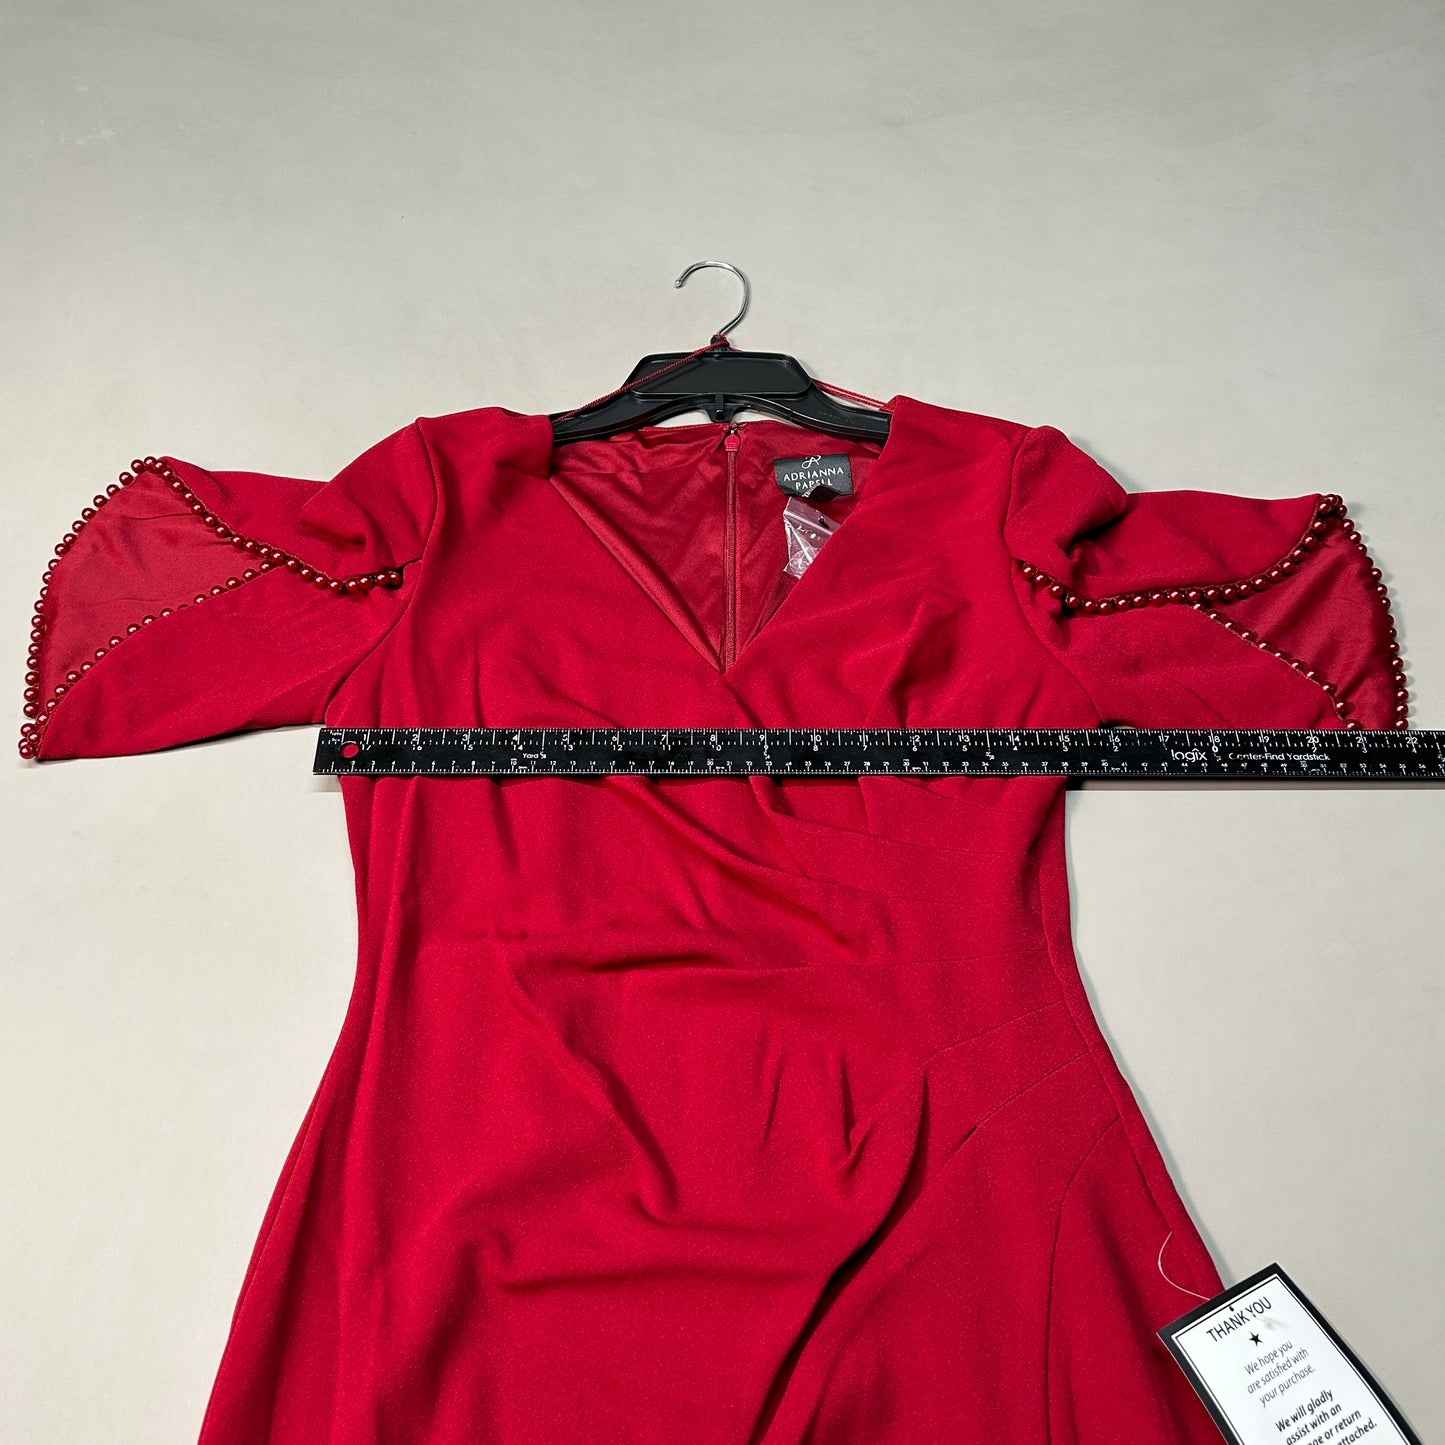 ADRIANNA PAPELL Knit Crepe Pearl Trim Dress Red Size 4 (New)